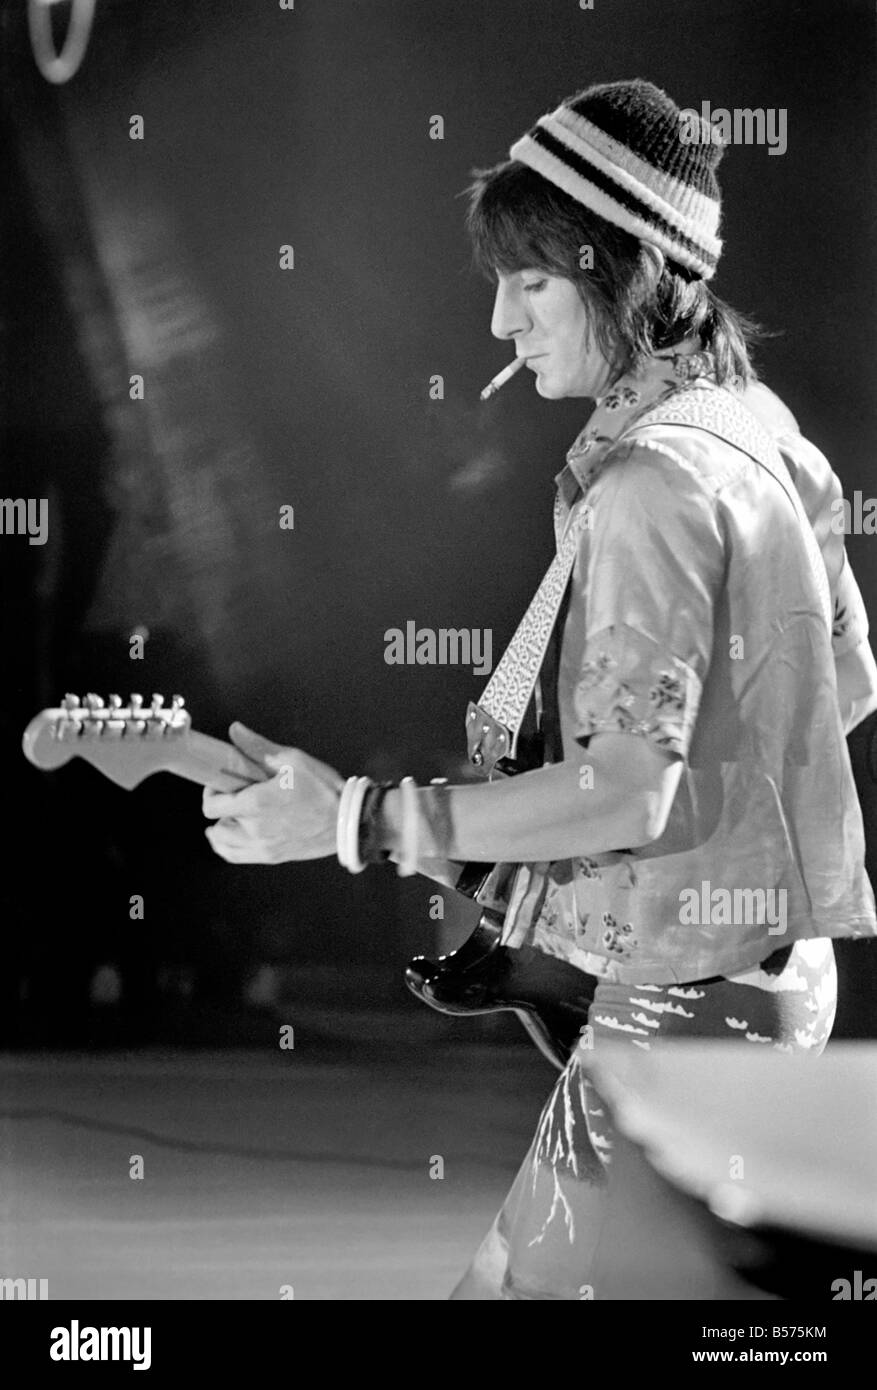 Ronnie Wood, guitarist with Rod Stewart and The Faces. Concert in USA.  Music/Pop/1970s. April 1975 75-01038-007 Stock Photo - Alamy